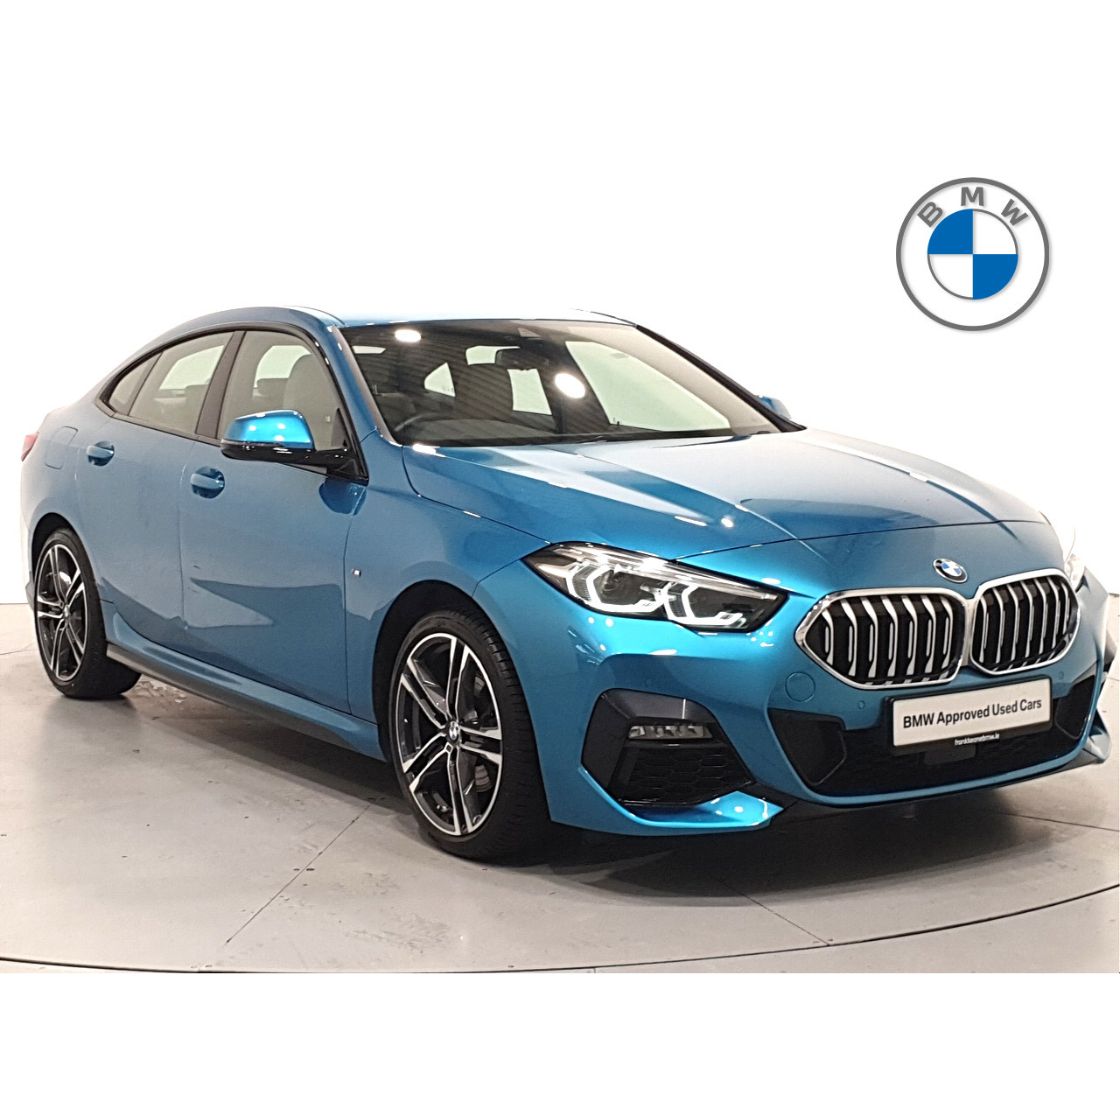 a photograph of a blue BMW car following quality control. good quality used car photography